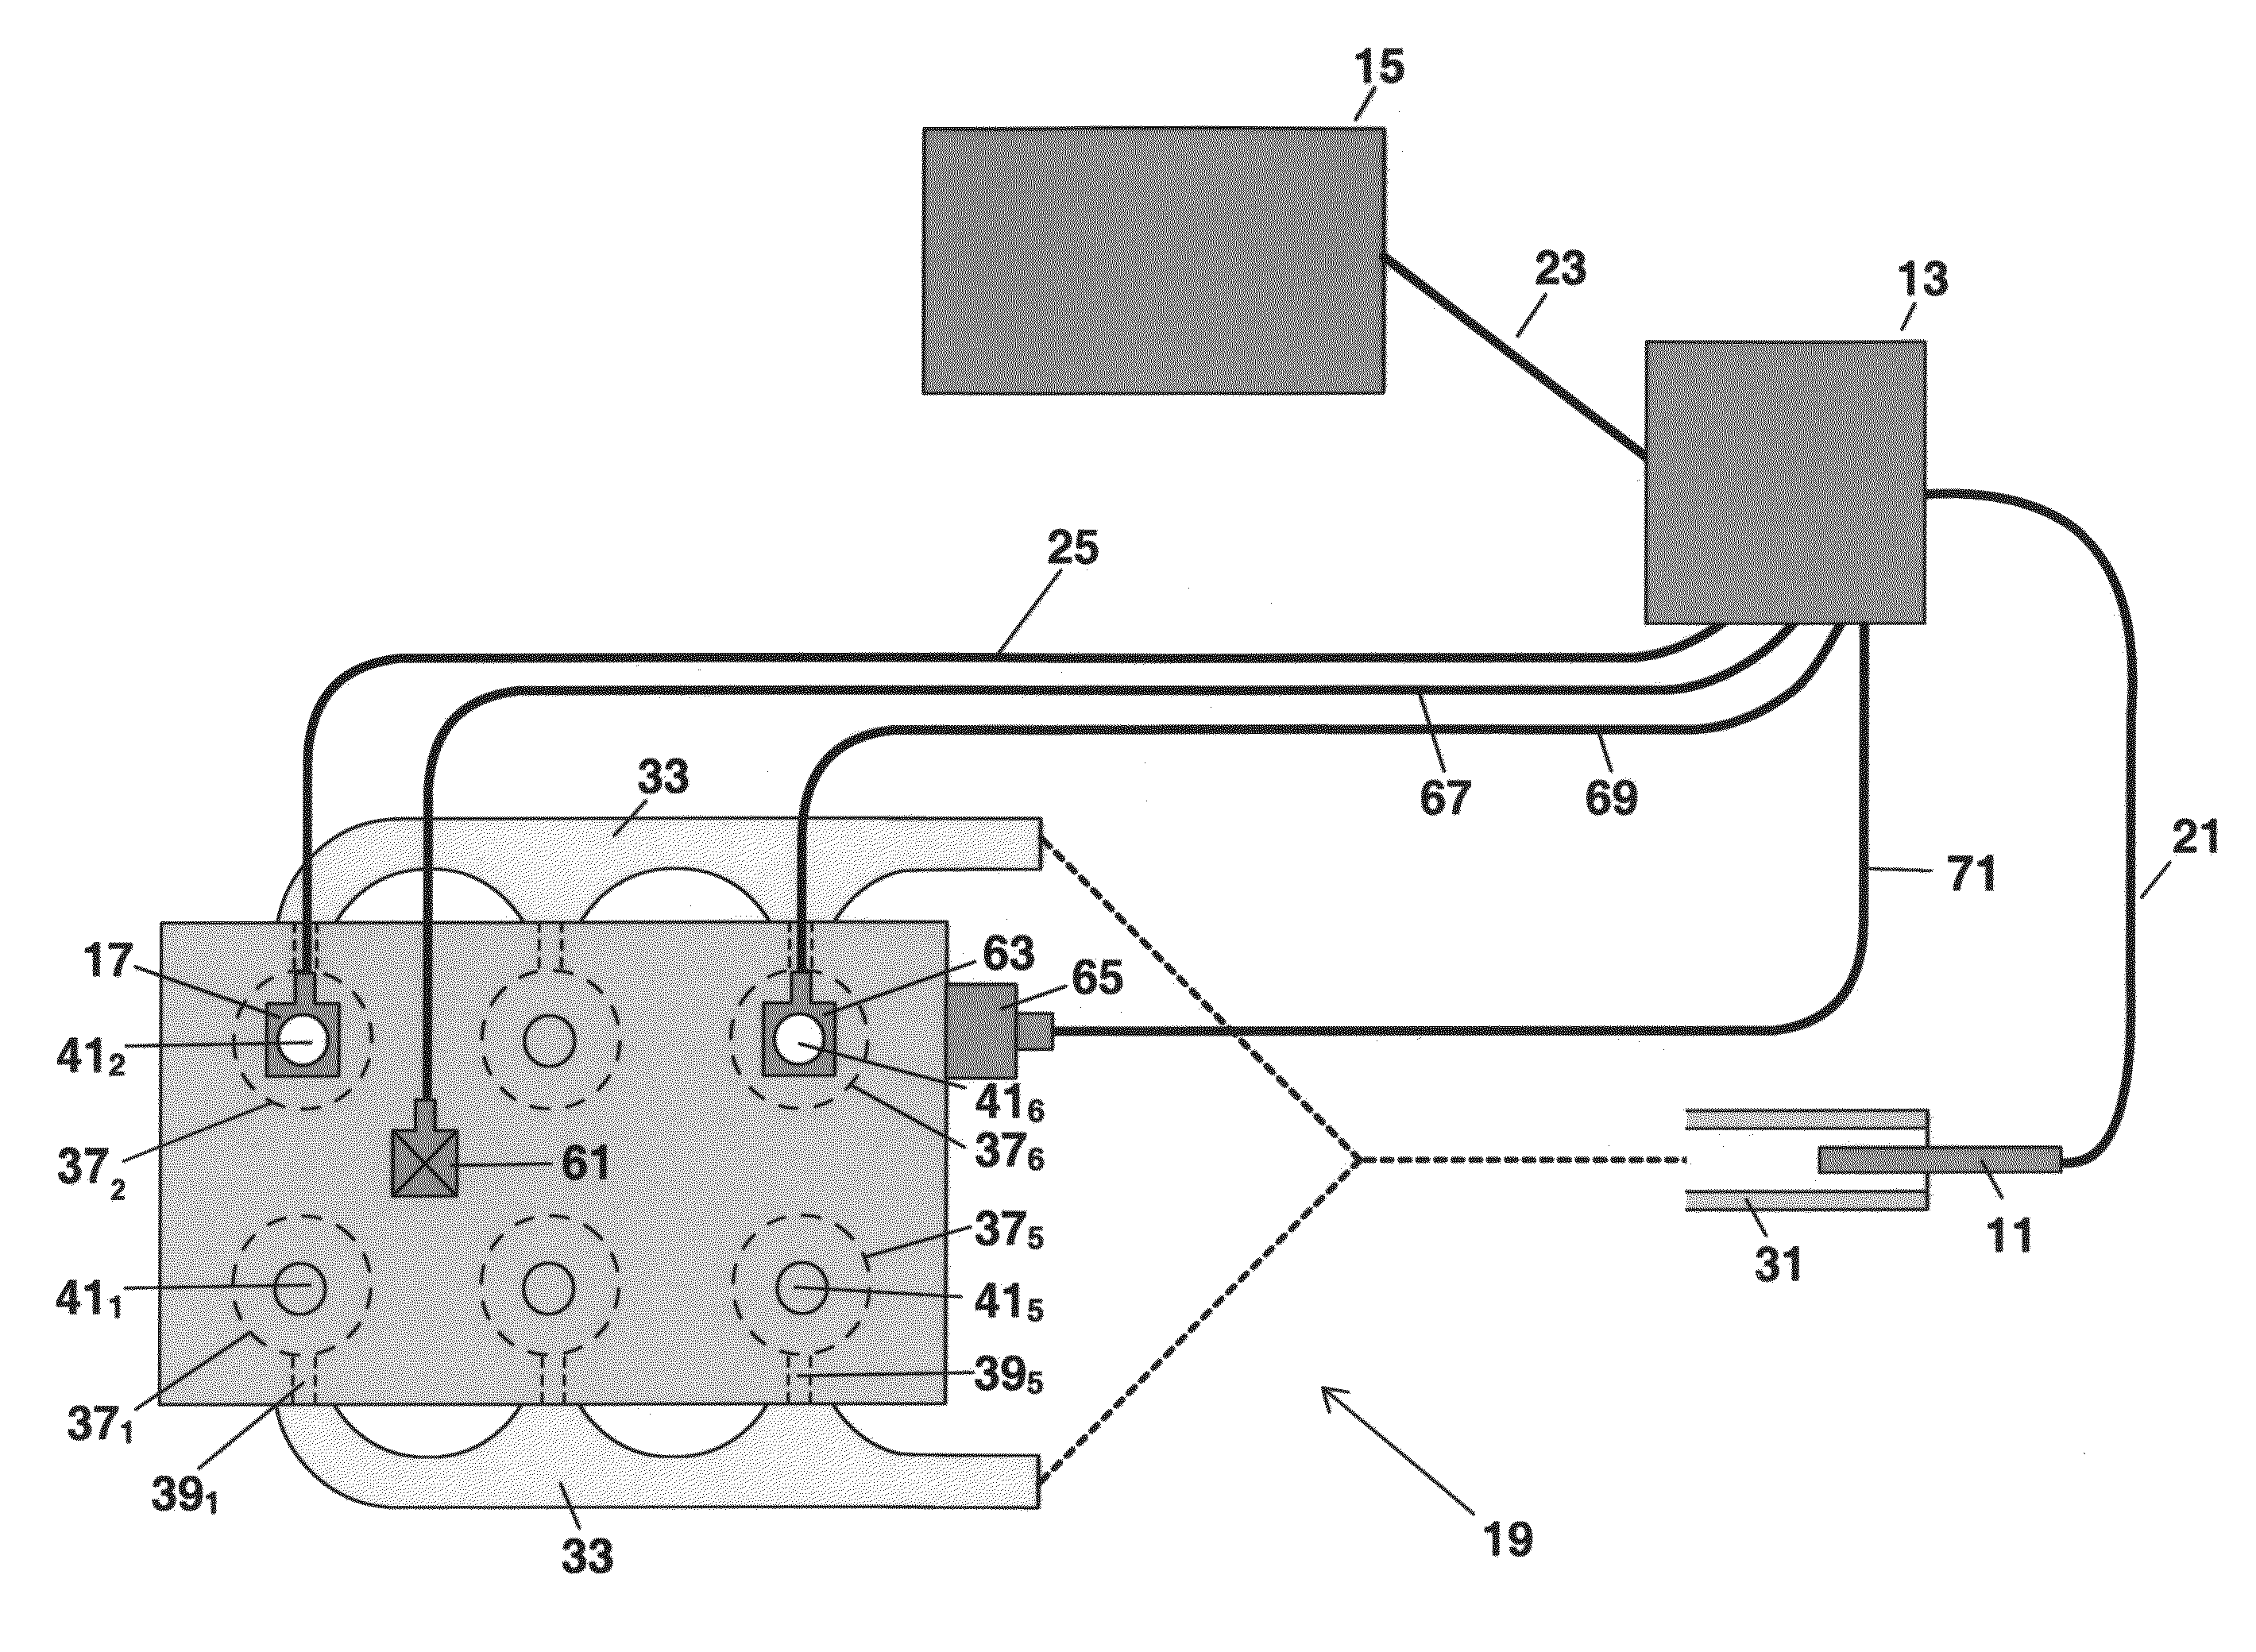 Method and apparatus for detecting misfires and idenfifying causes